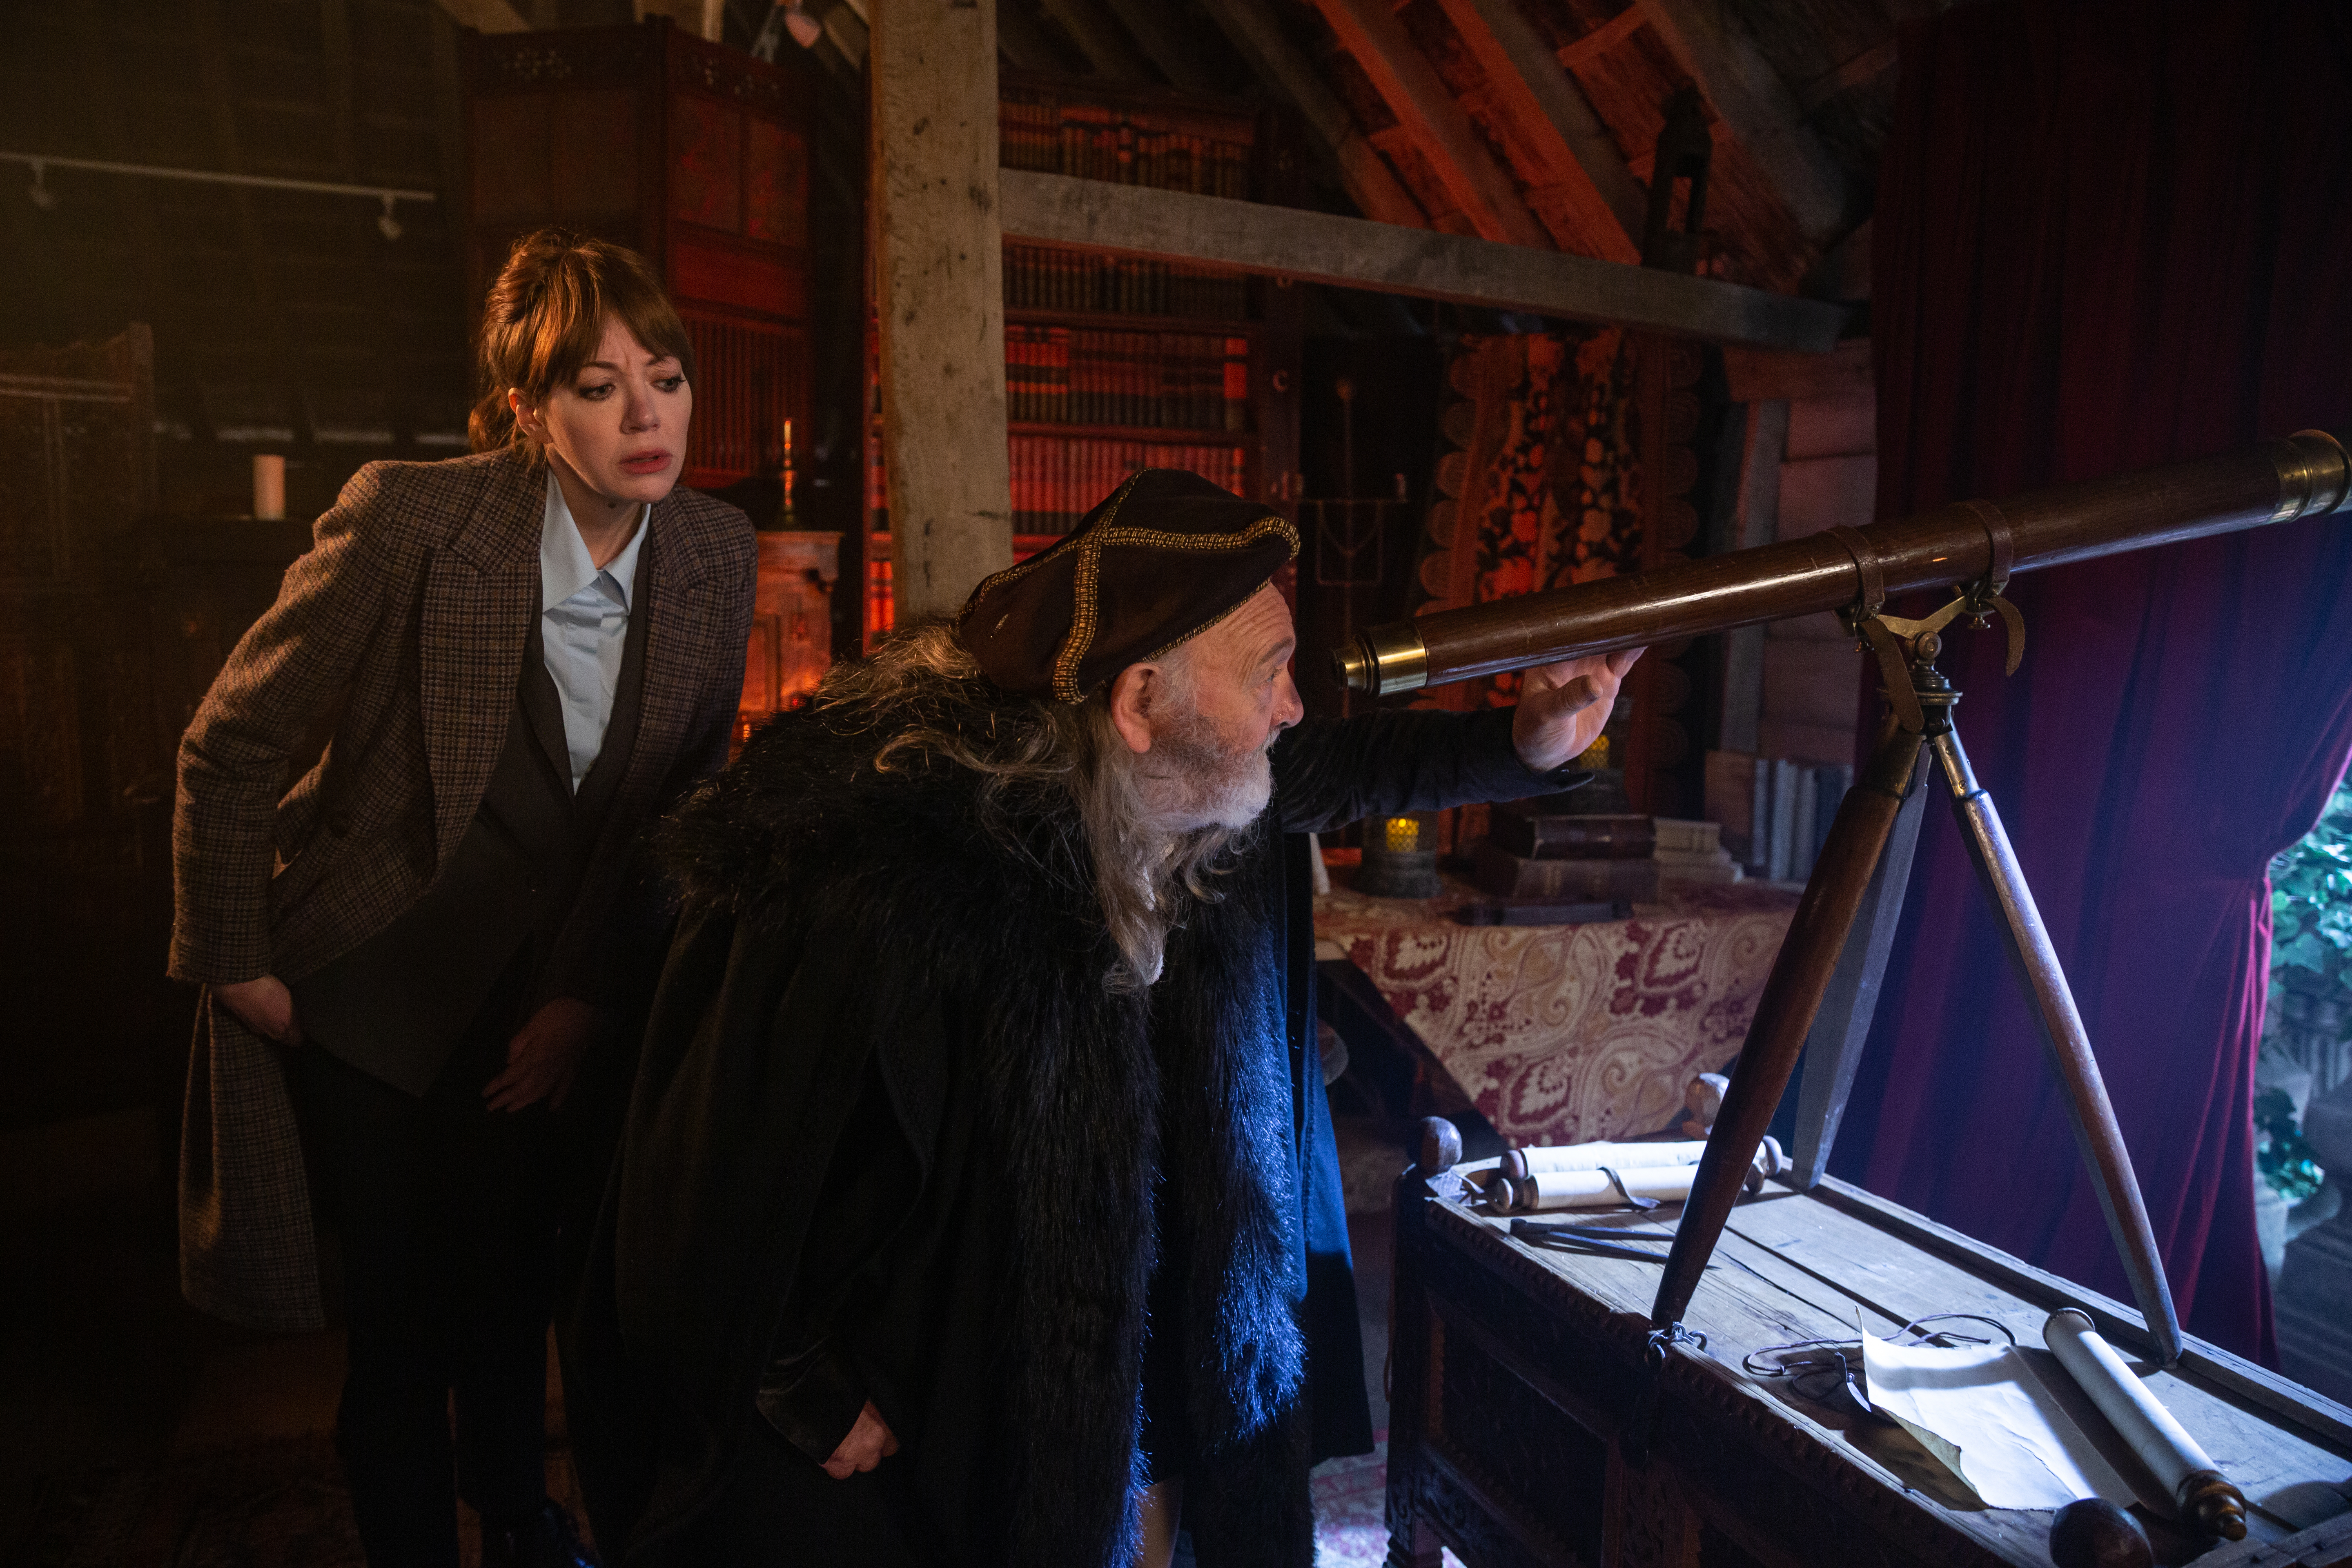 Diane Morgan as Philomena Cunk with 'Galileo' in 'Cunk on Earth'. Image: Courtesy of Netflix